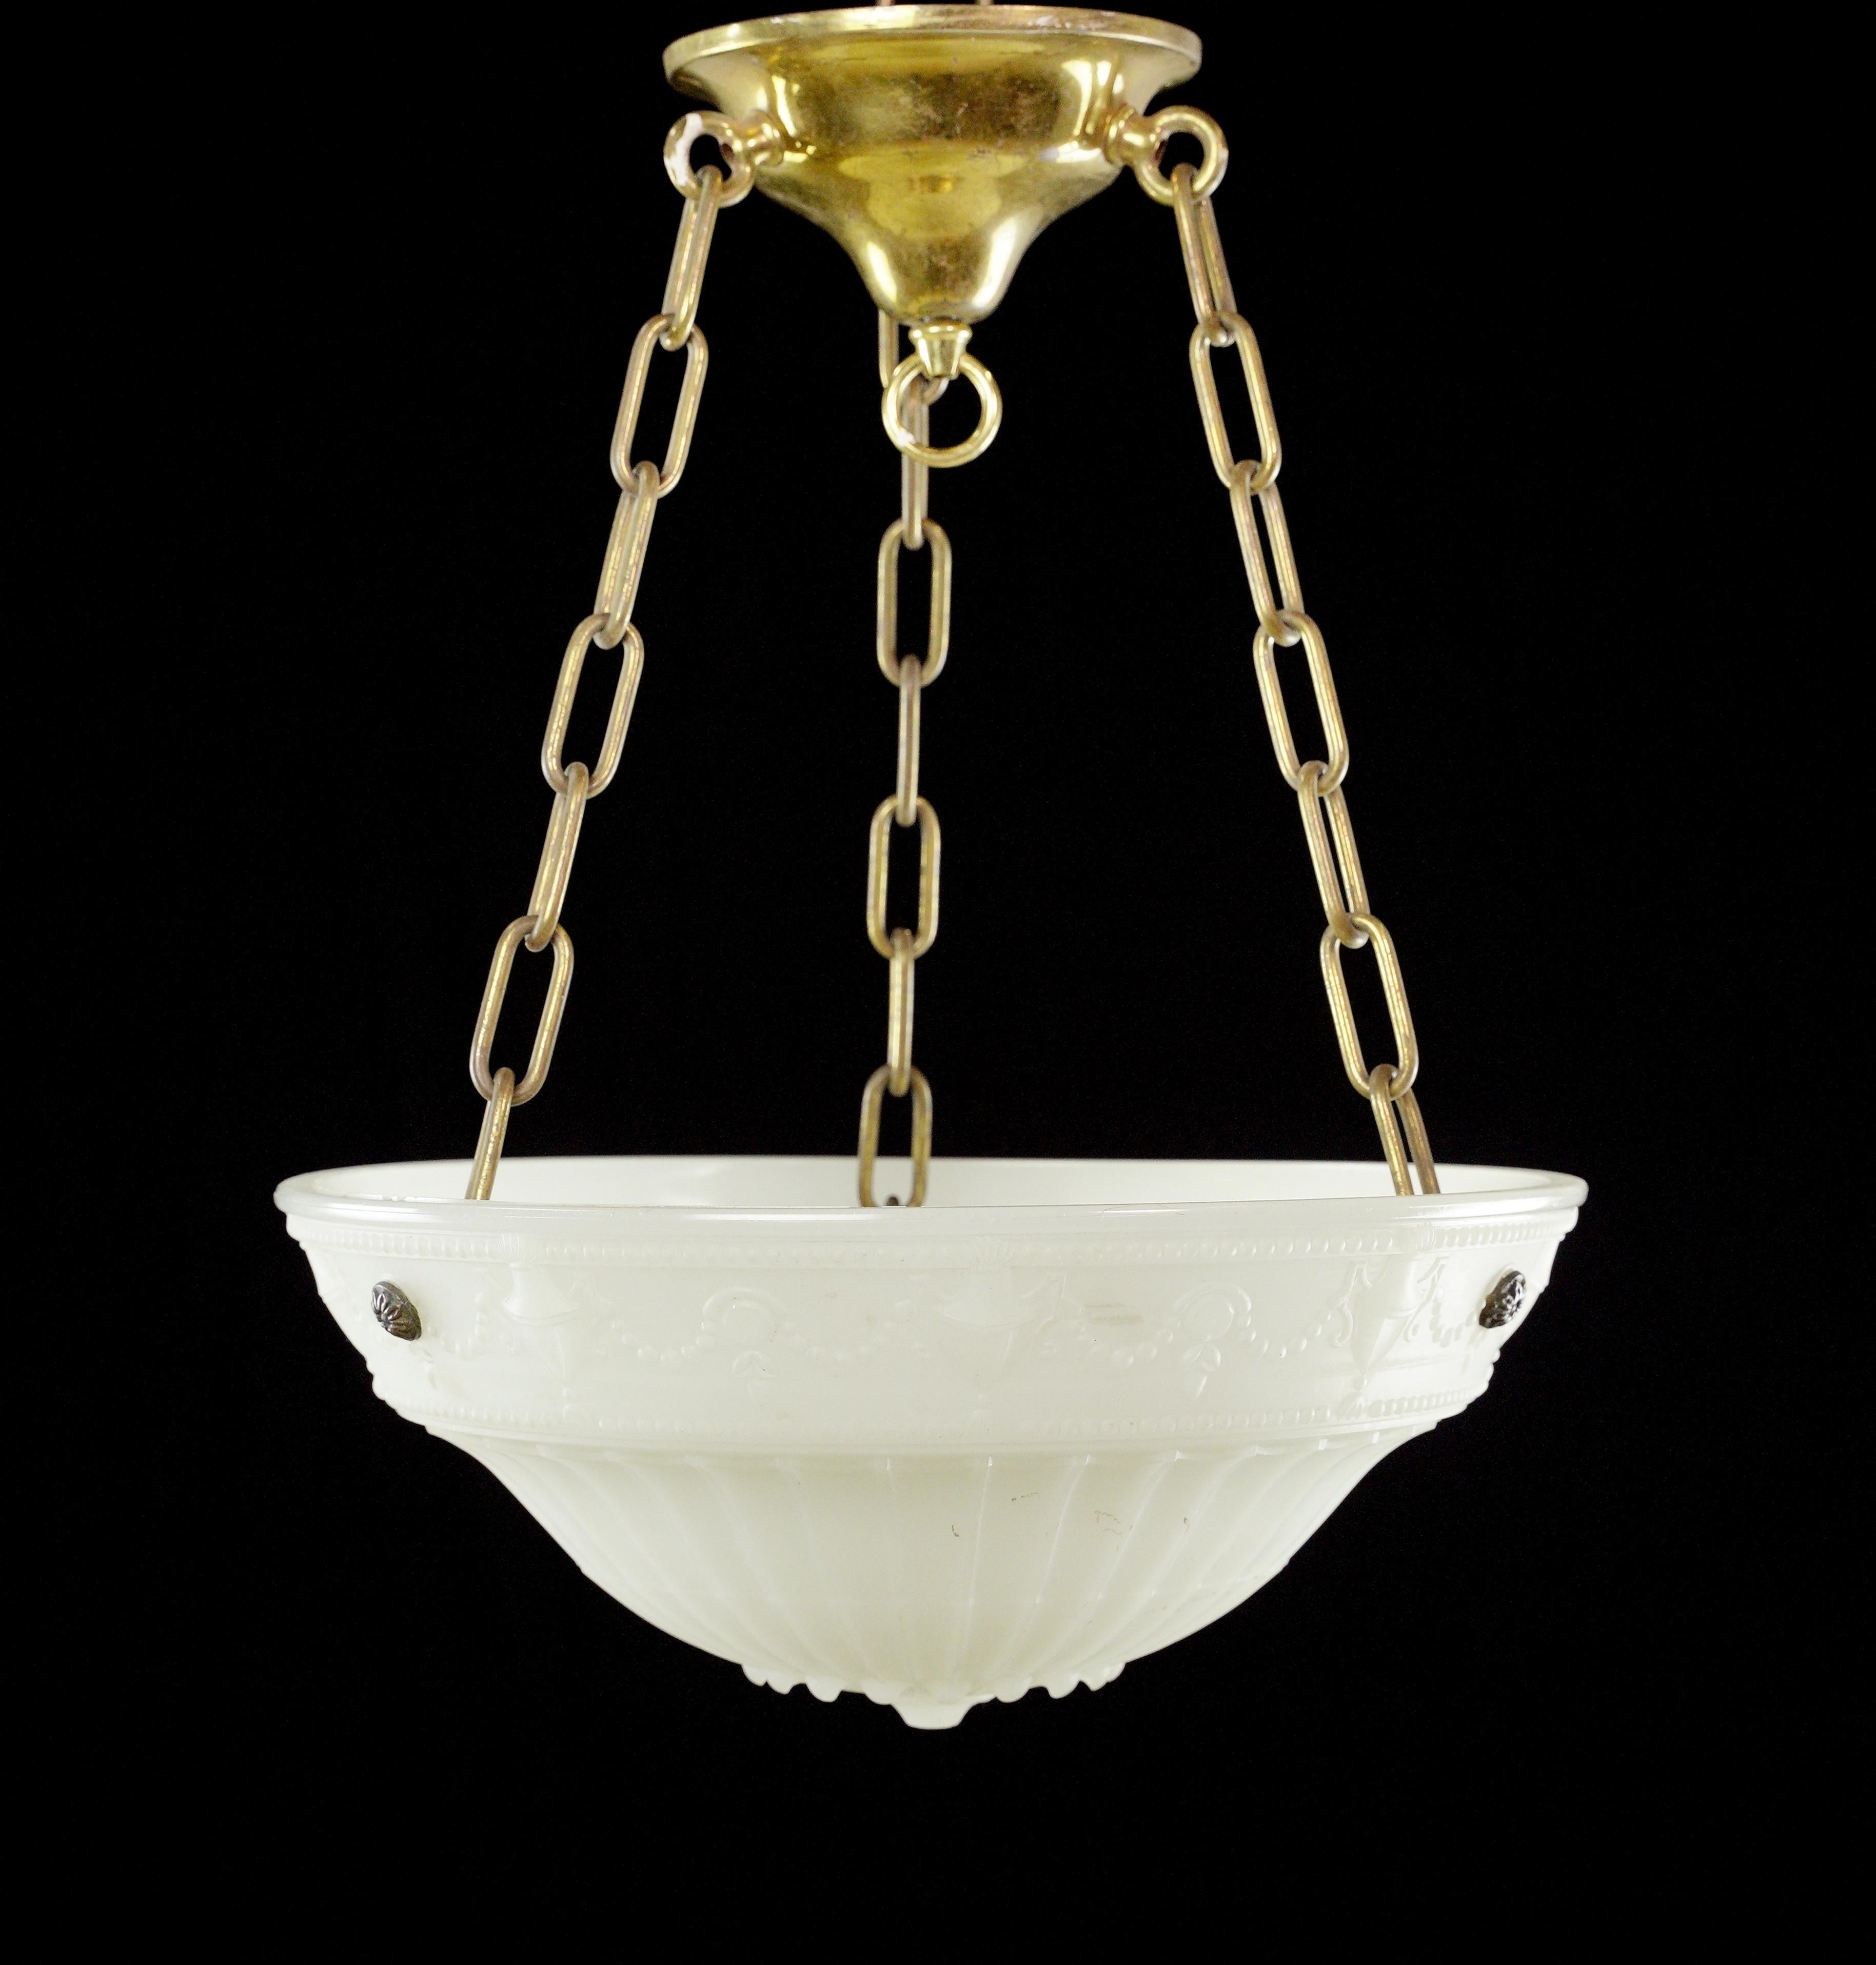 This Victorian pendant light is an exquisite vintage fixture featuring a milk glass dish with intricate ornate designs suspended from a polished brass chain, providing a captivating blend of elegance and nostalgia to any space. This is in good